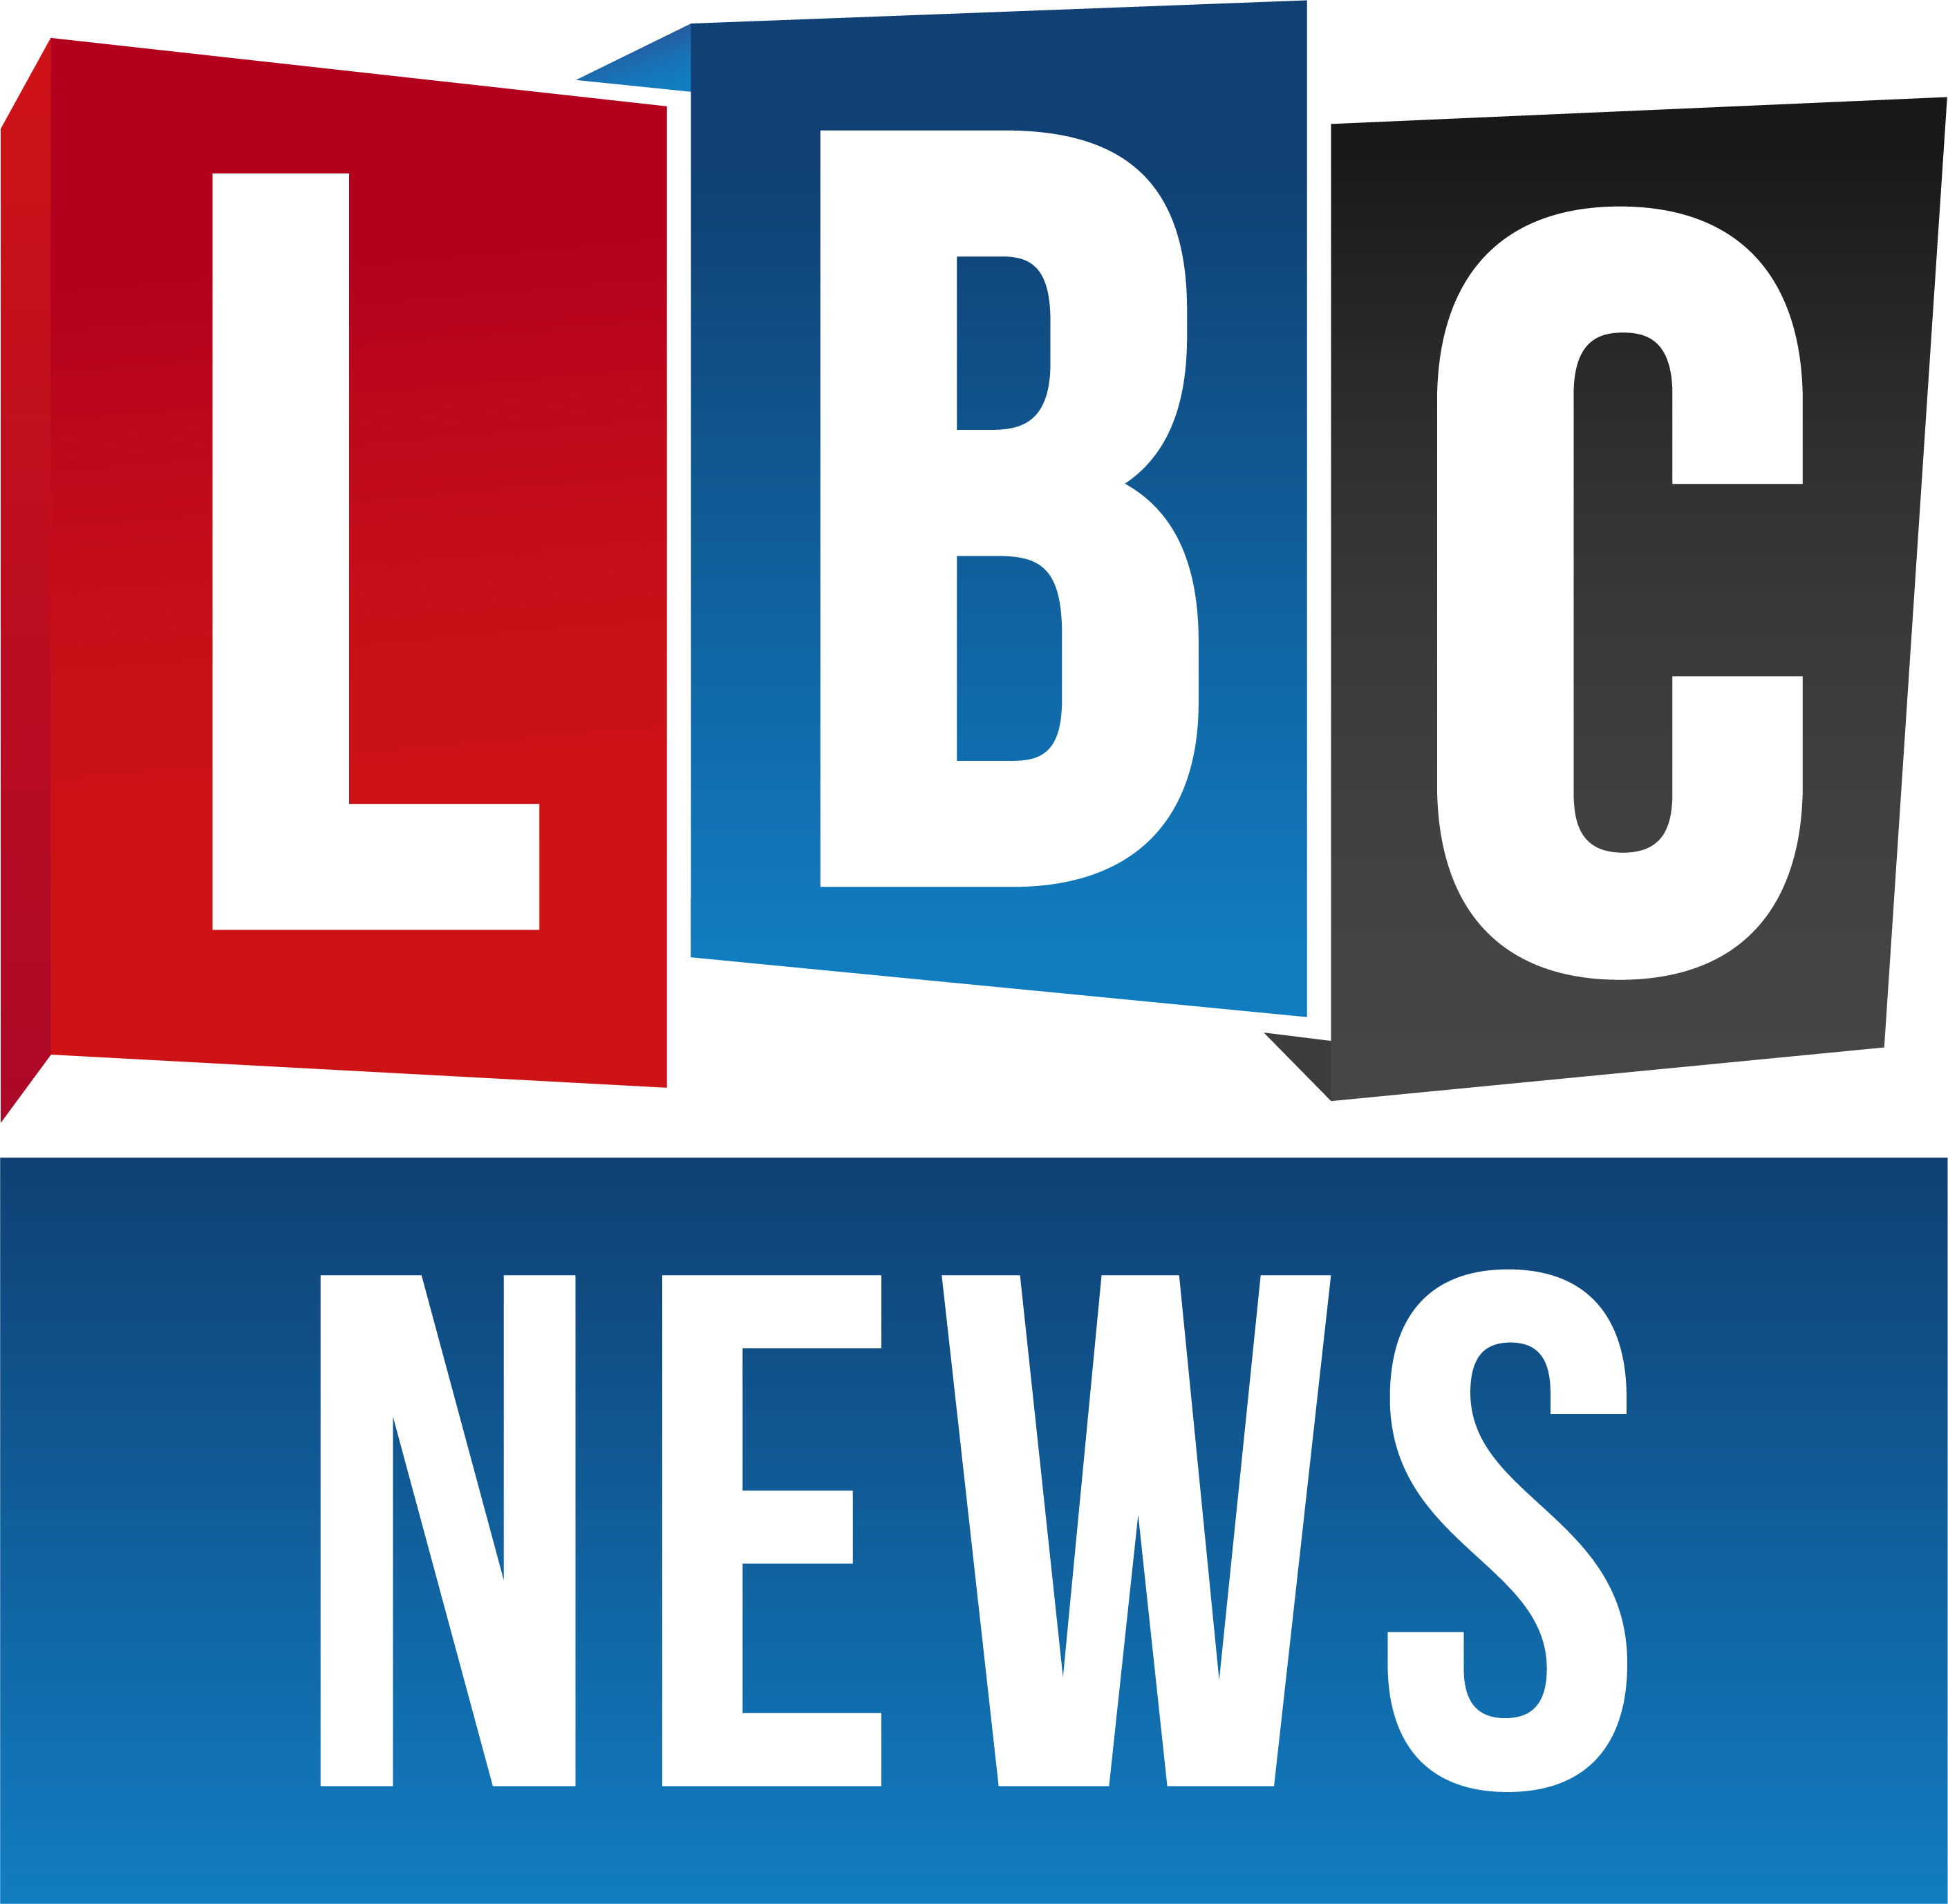 LBC News logo in red blue and black